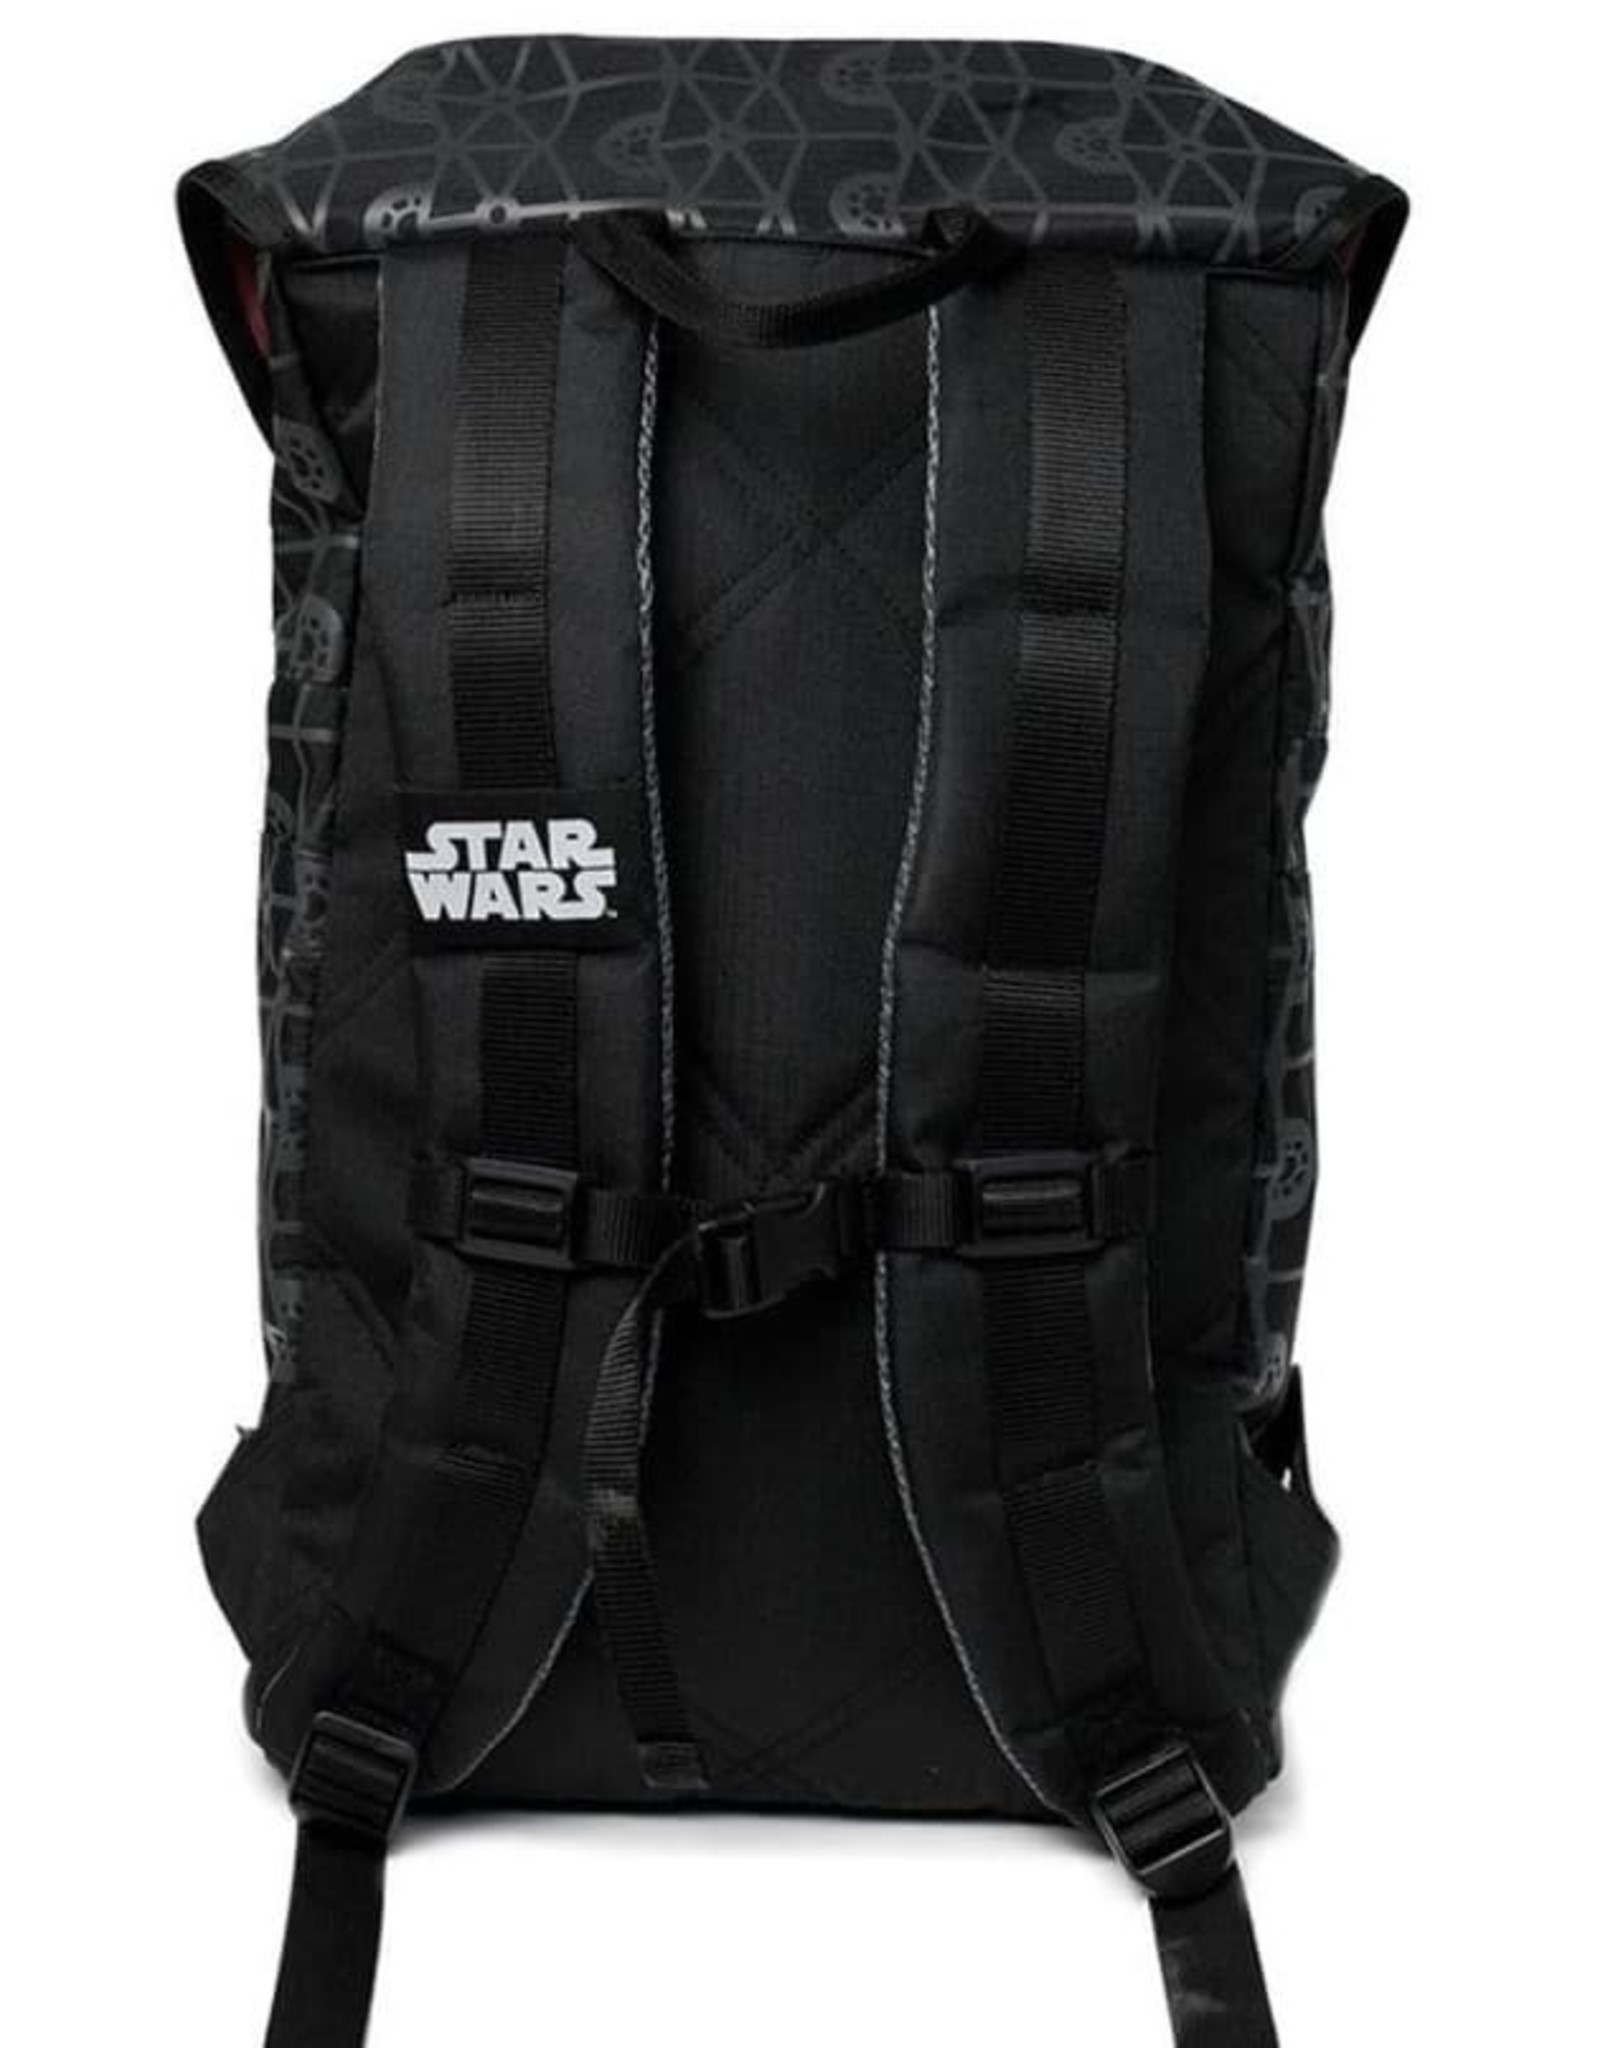 Star Wars Star Wars bags - Star Wars First order sports backpack